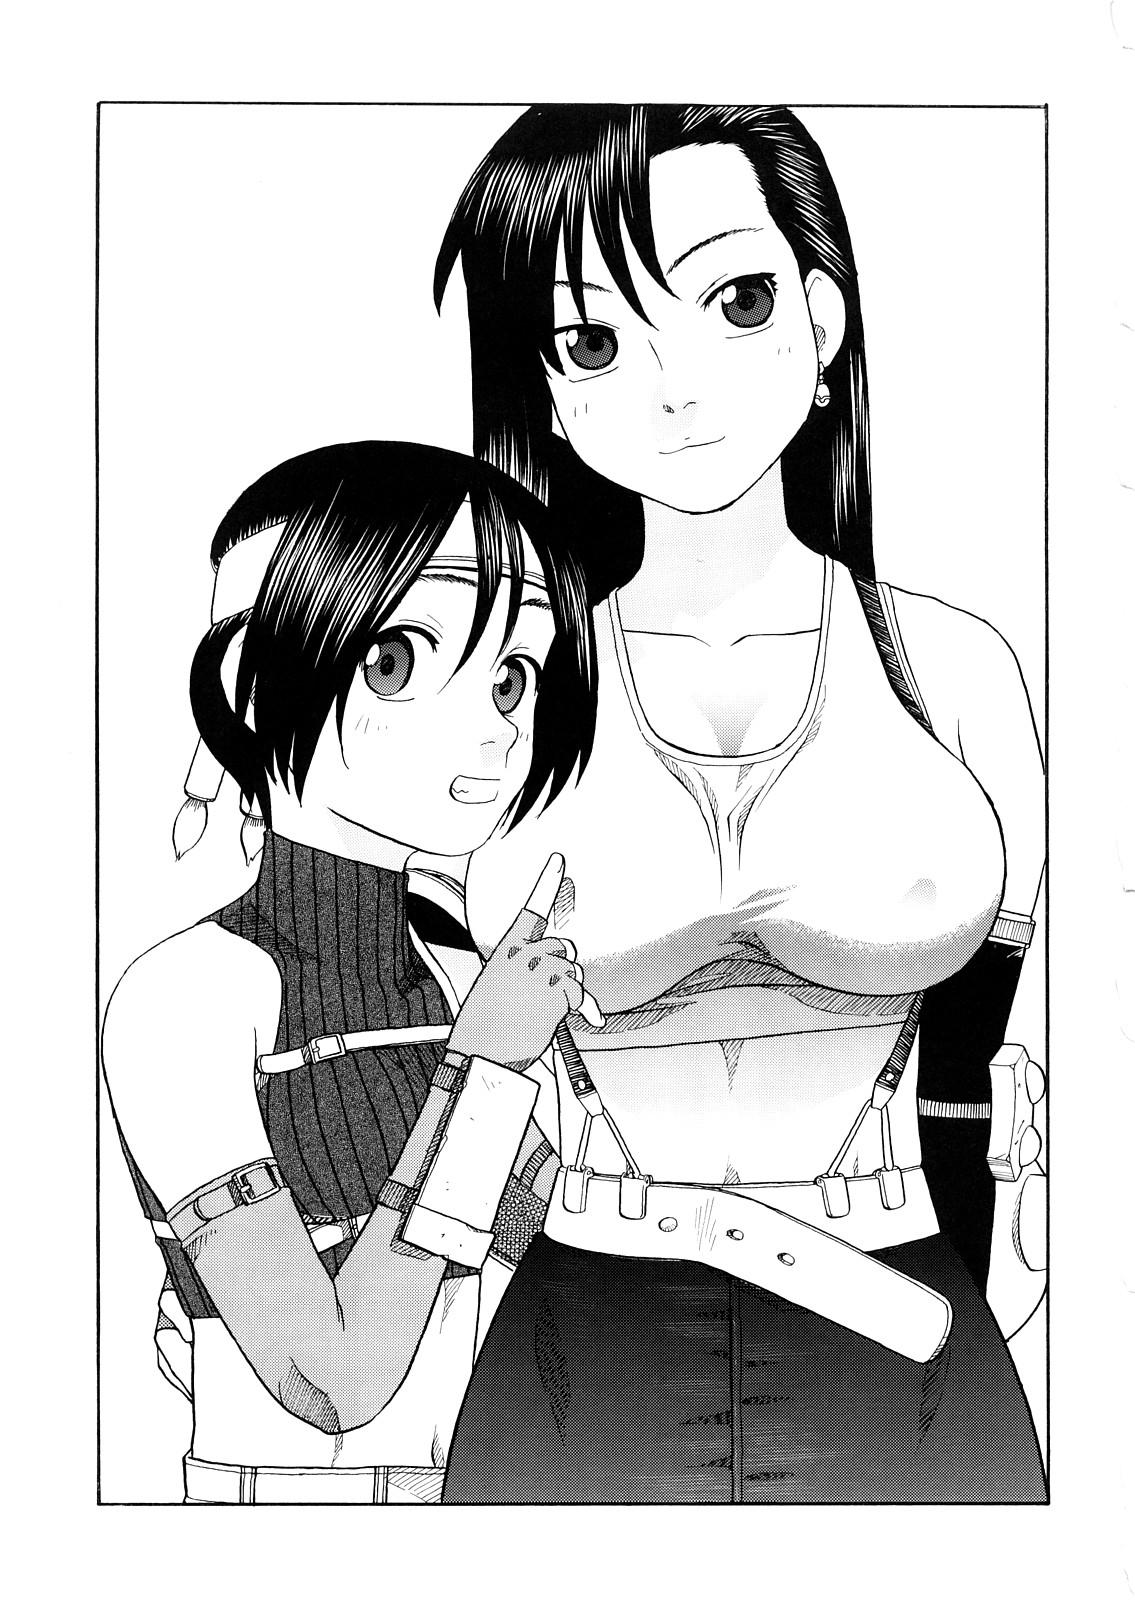 Camporn Tifa to Yuffie to Yojouhan - Final fantasy vii Audition - Page 2